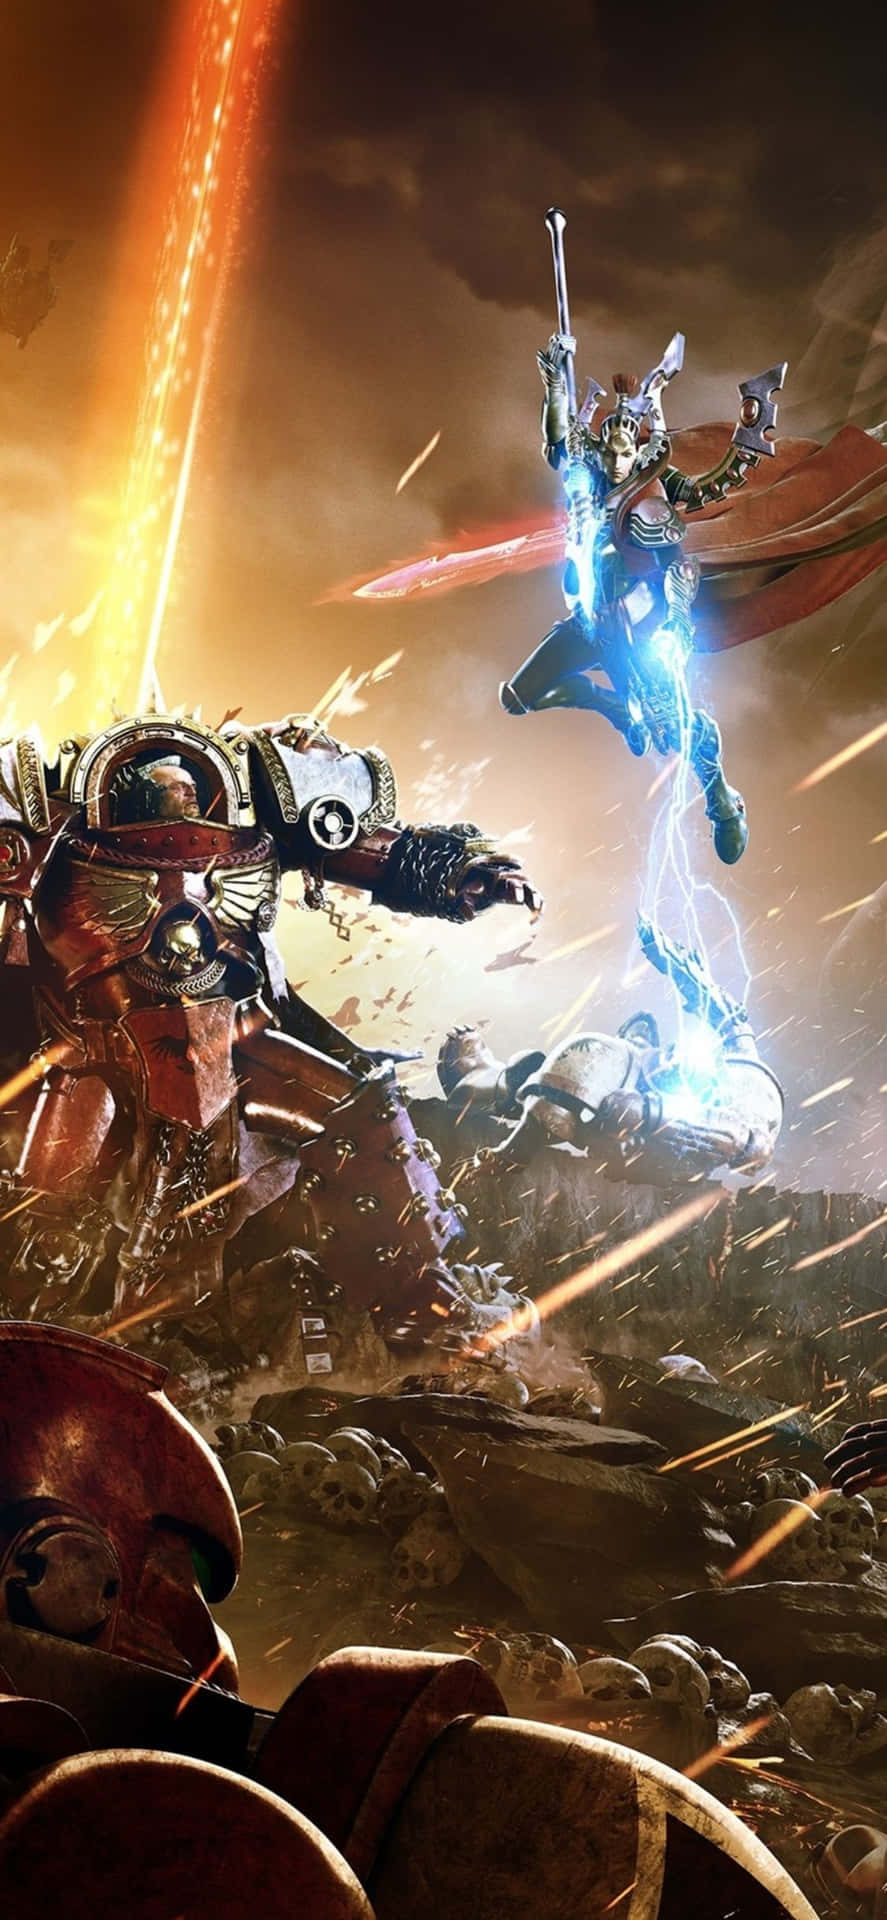 Join the battle with the Iphone XS and Dawn Of War III